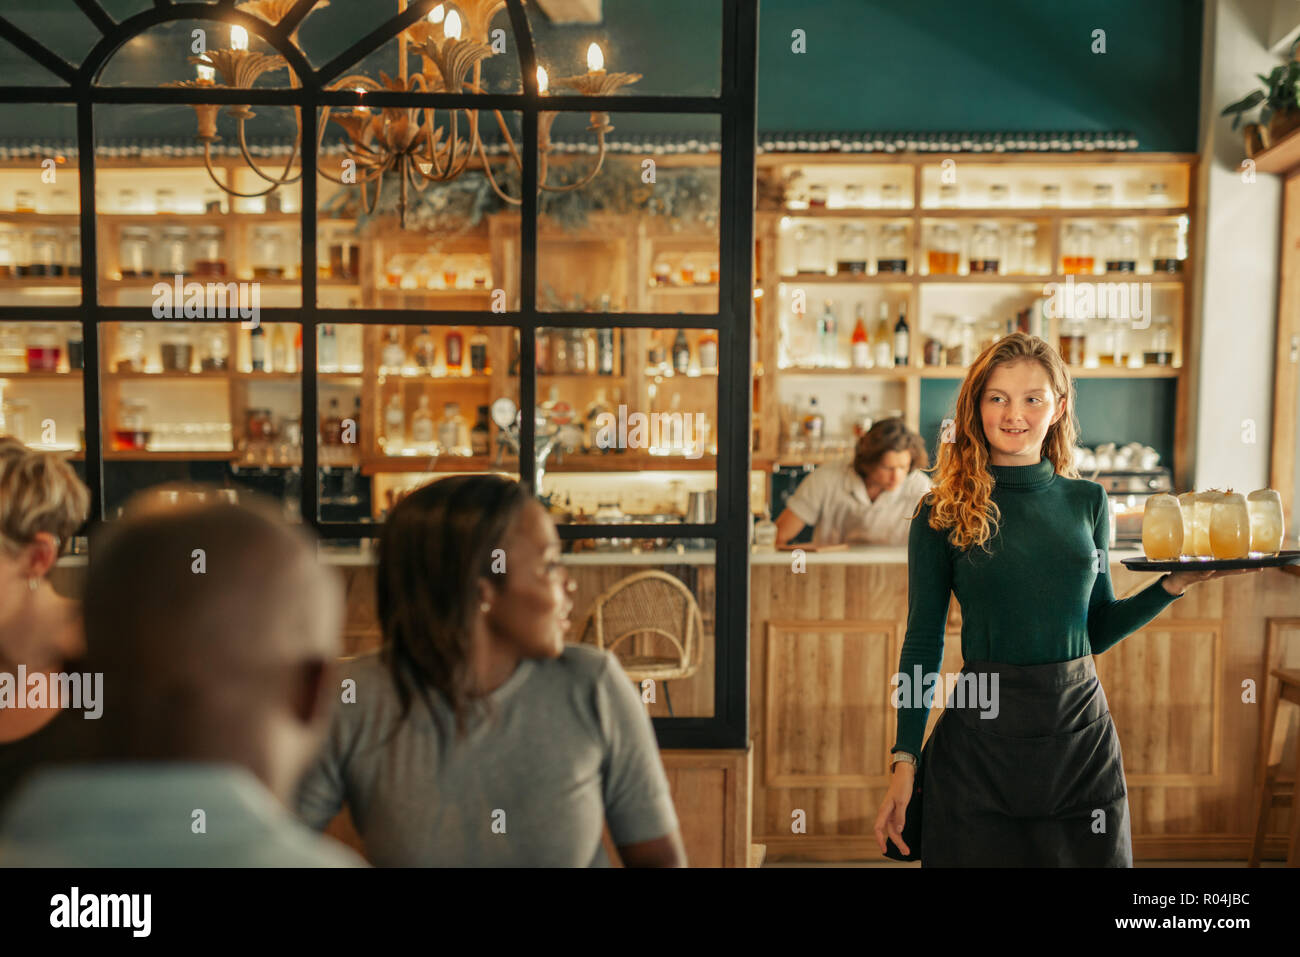 Smiling waitress bringing drinks to people sitting in a bar Stock Photo